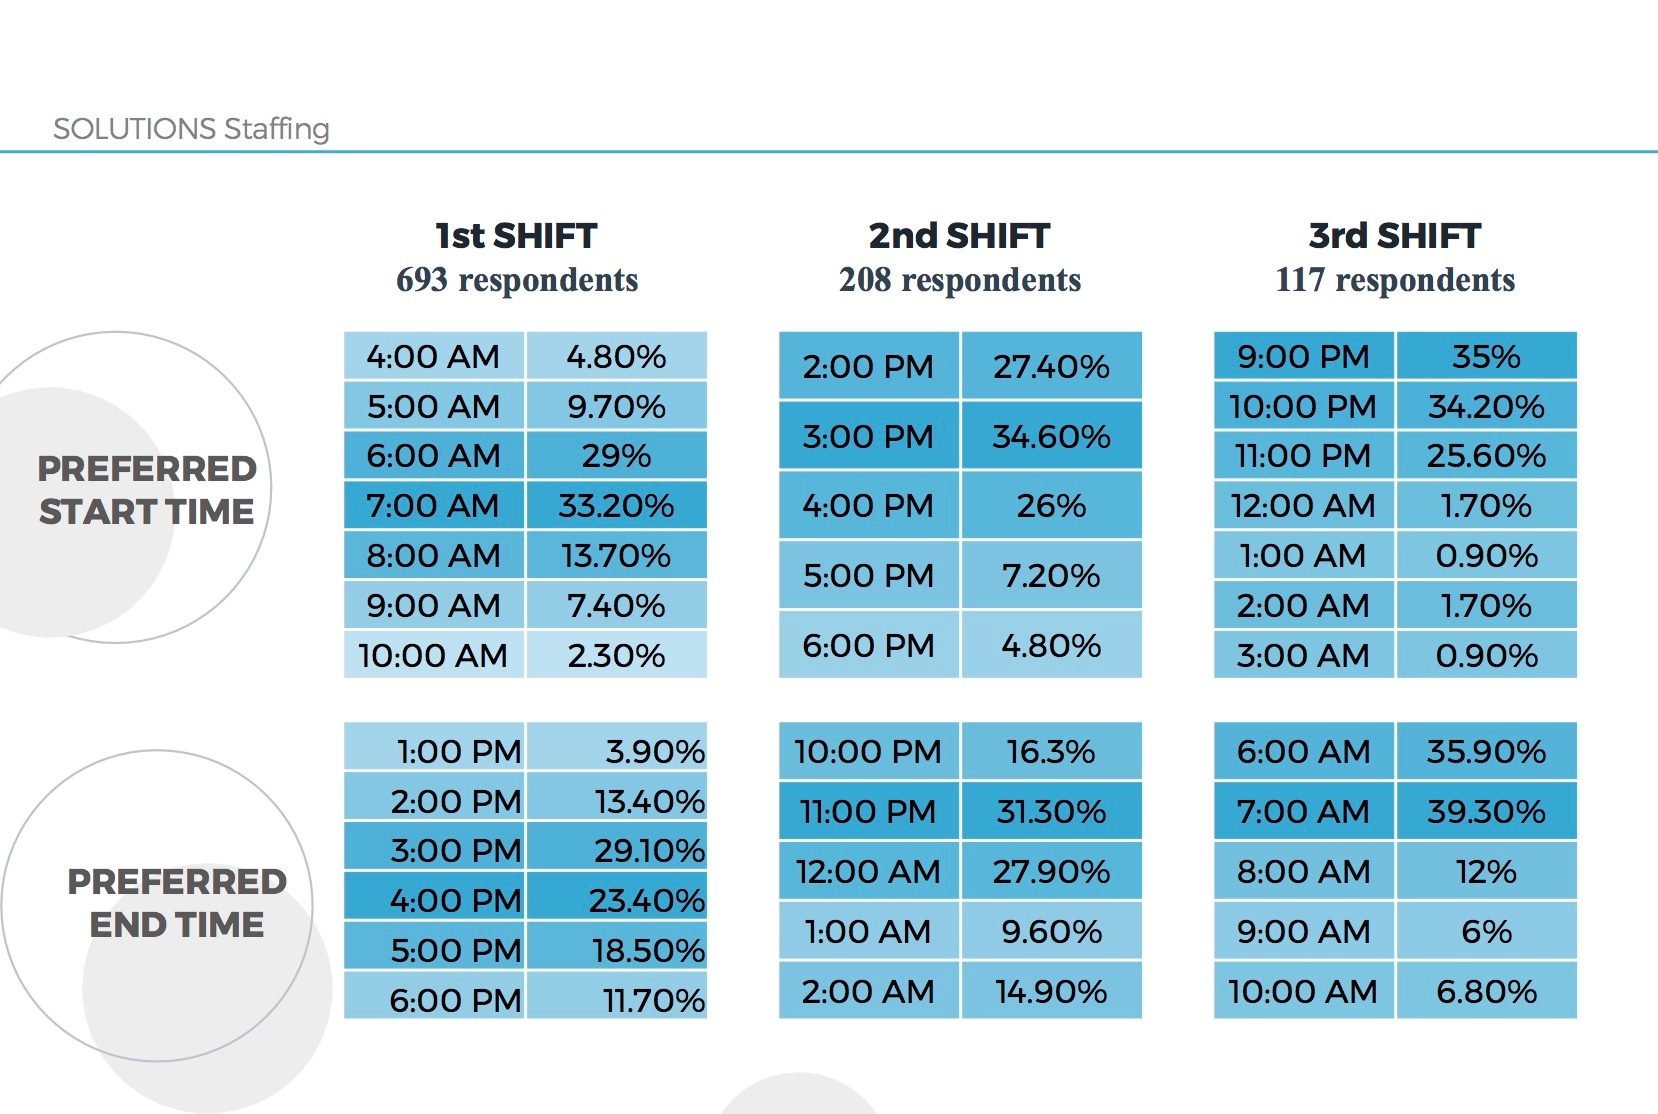 How to Think About the Shifting Preferred Shift Start Times